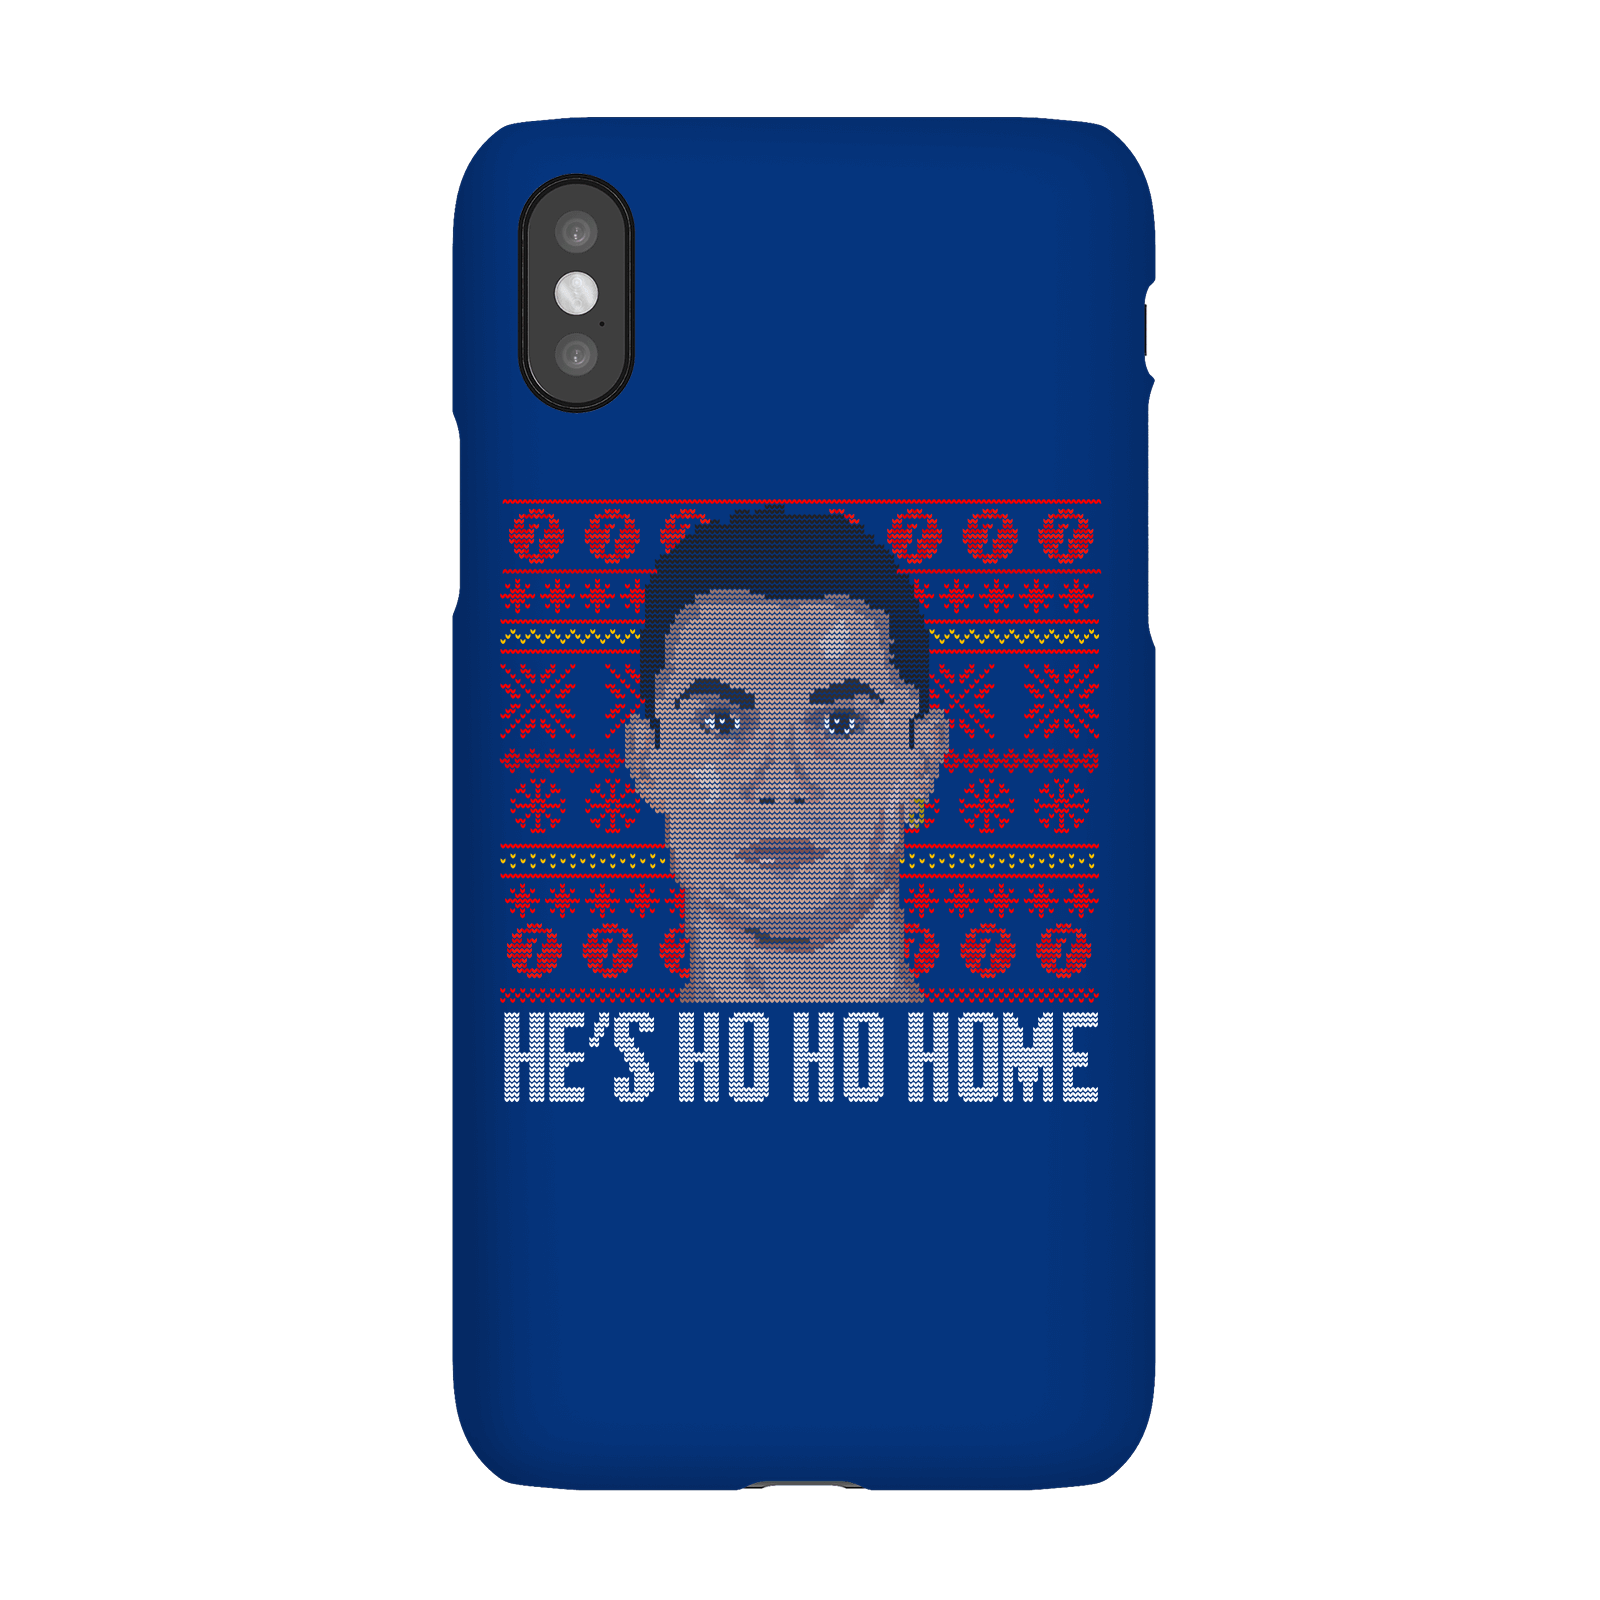 He's Coming Ho Ho Home Phone Case for iPhone and Android - iPhone 5/5s - Snap Case - Matte